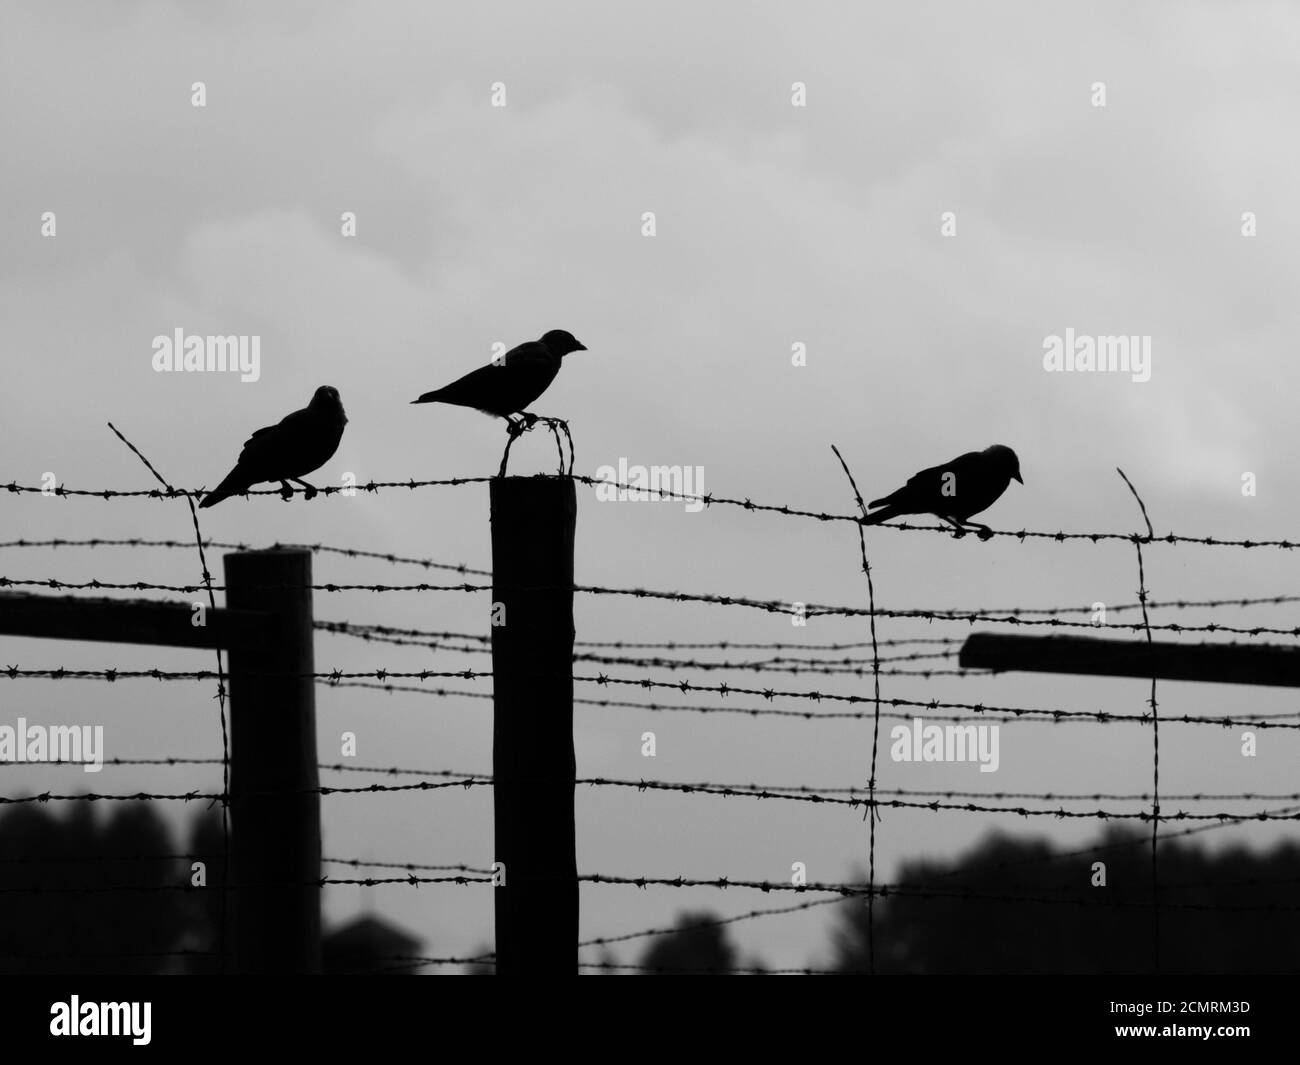 Three crows sitting on the barb wire fence, silhouette Stock Photo